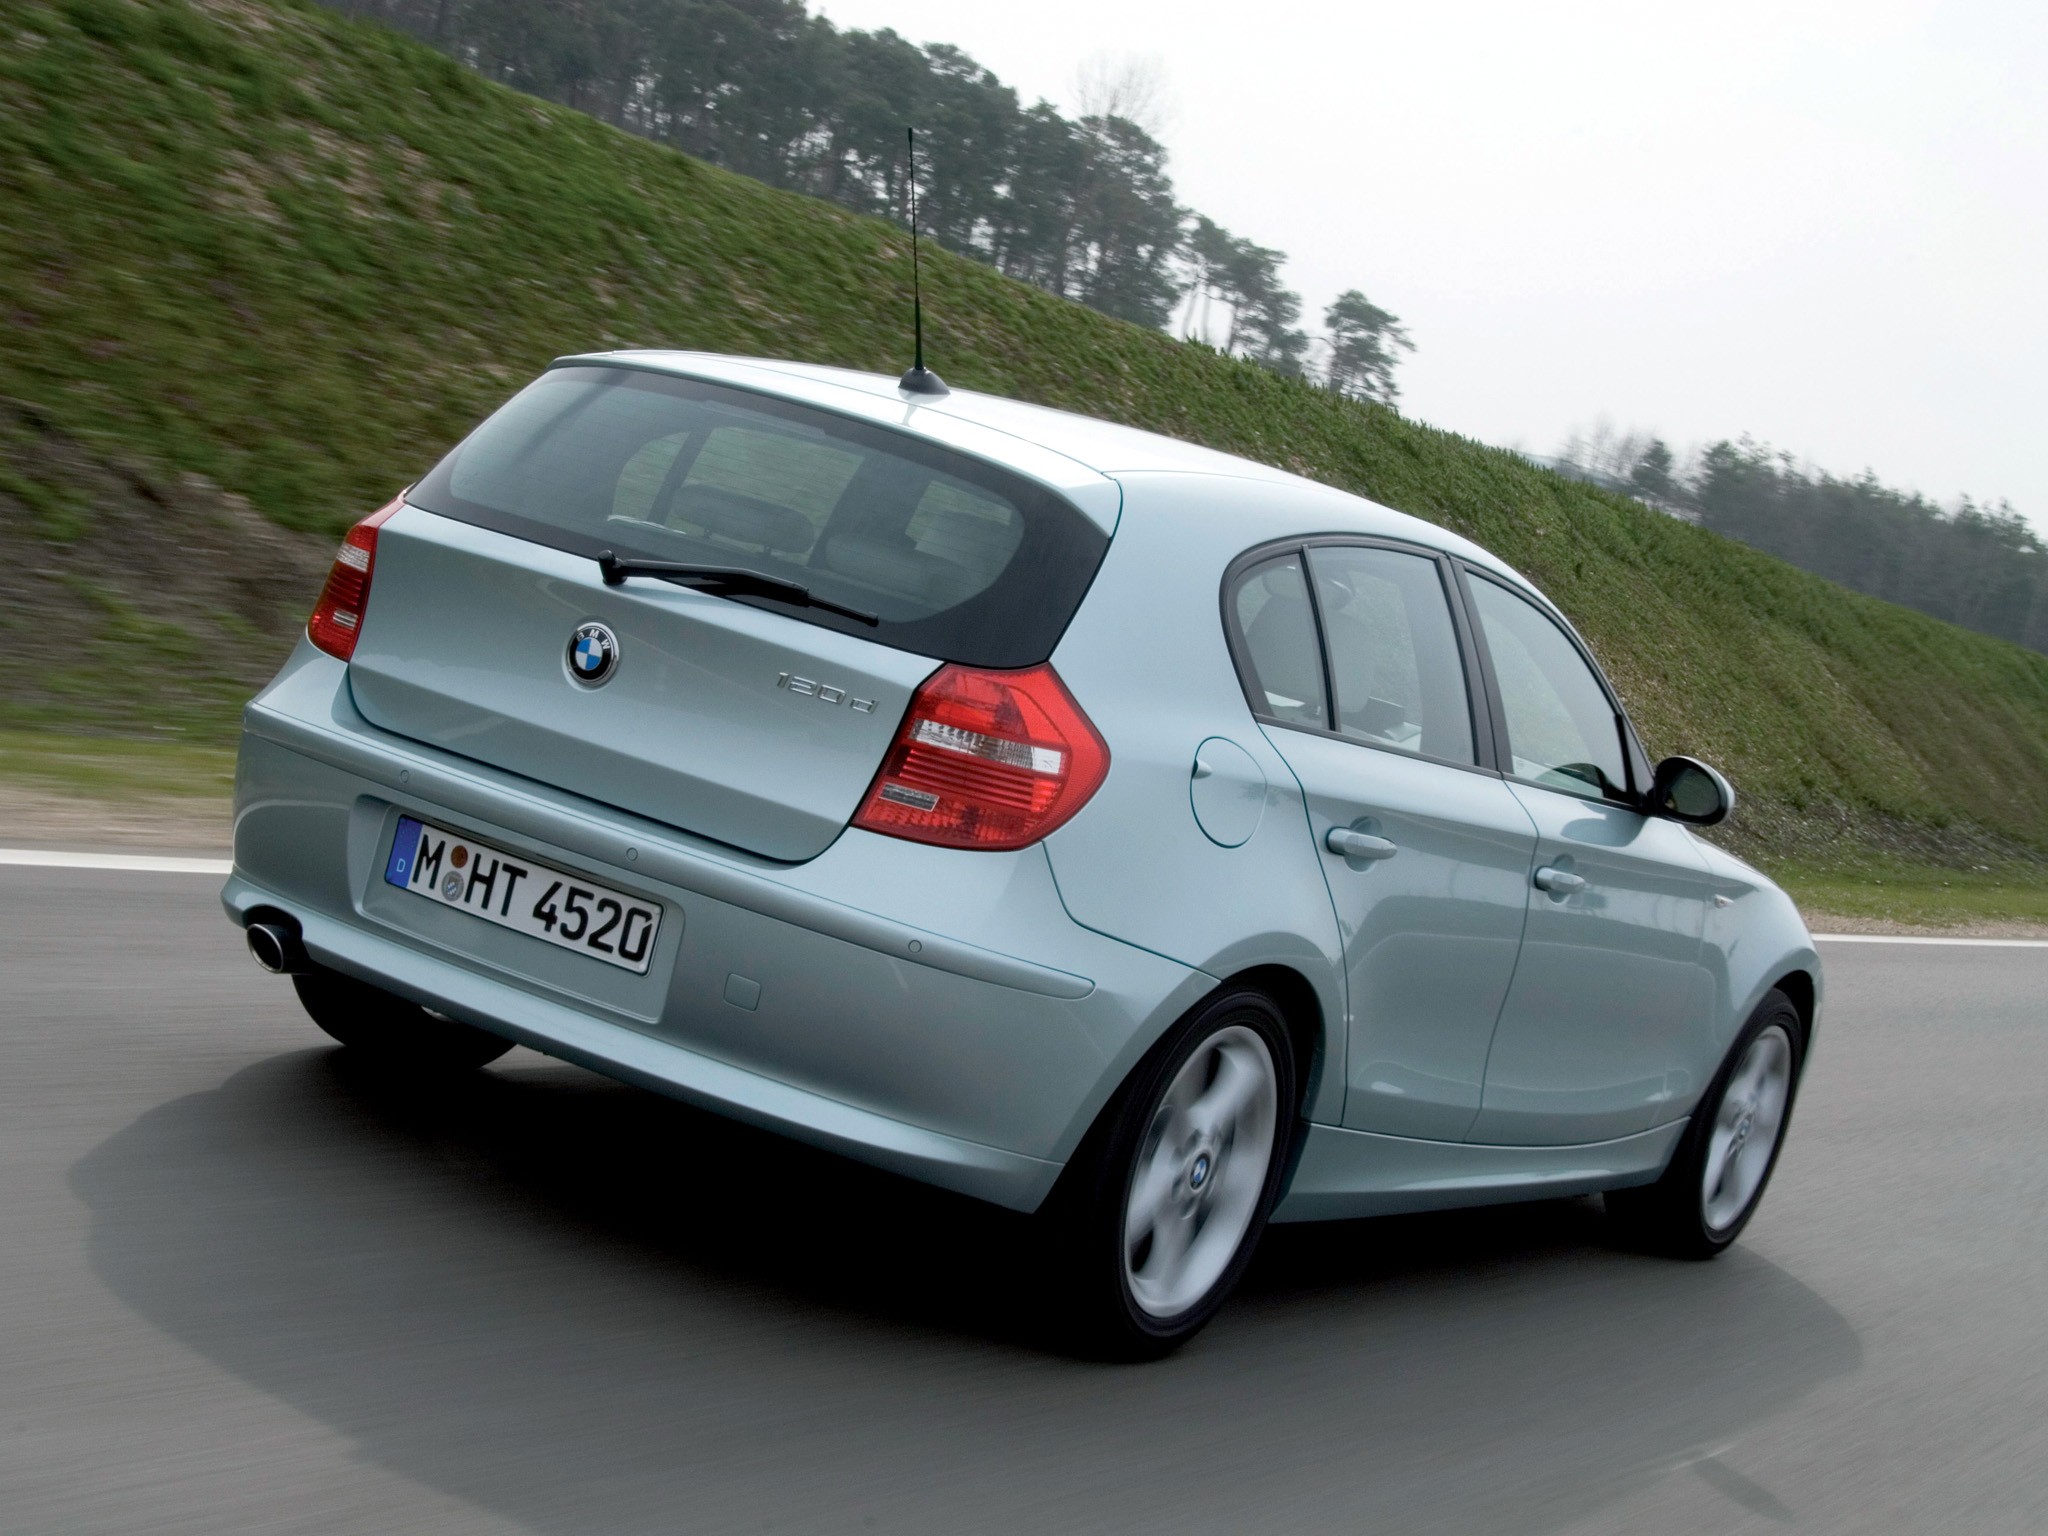 BMW 116i (E81) specs (2004-2007), performance, dimensions & technical  specifications - encyCARpedia